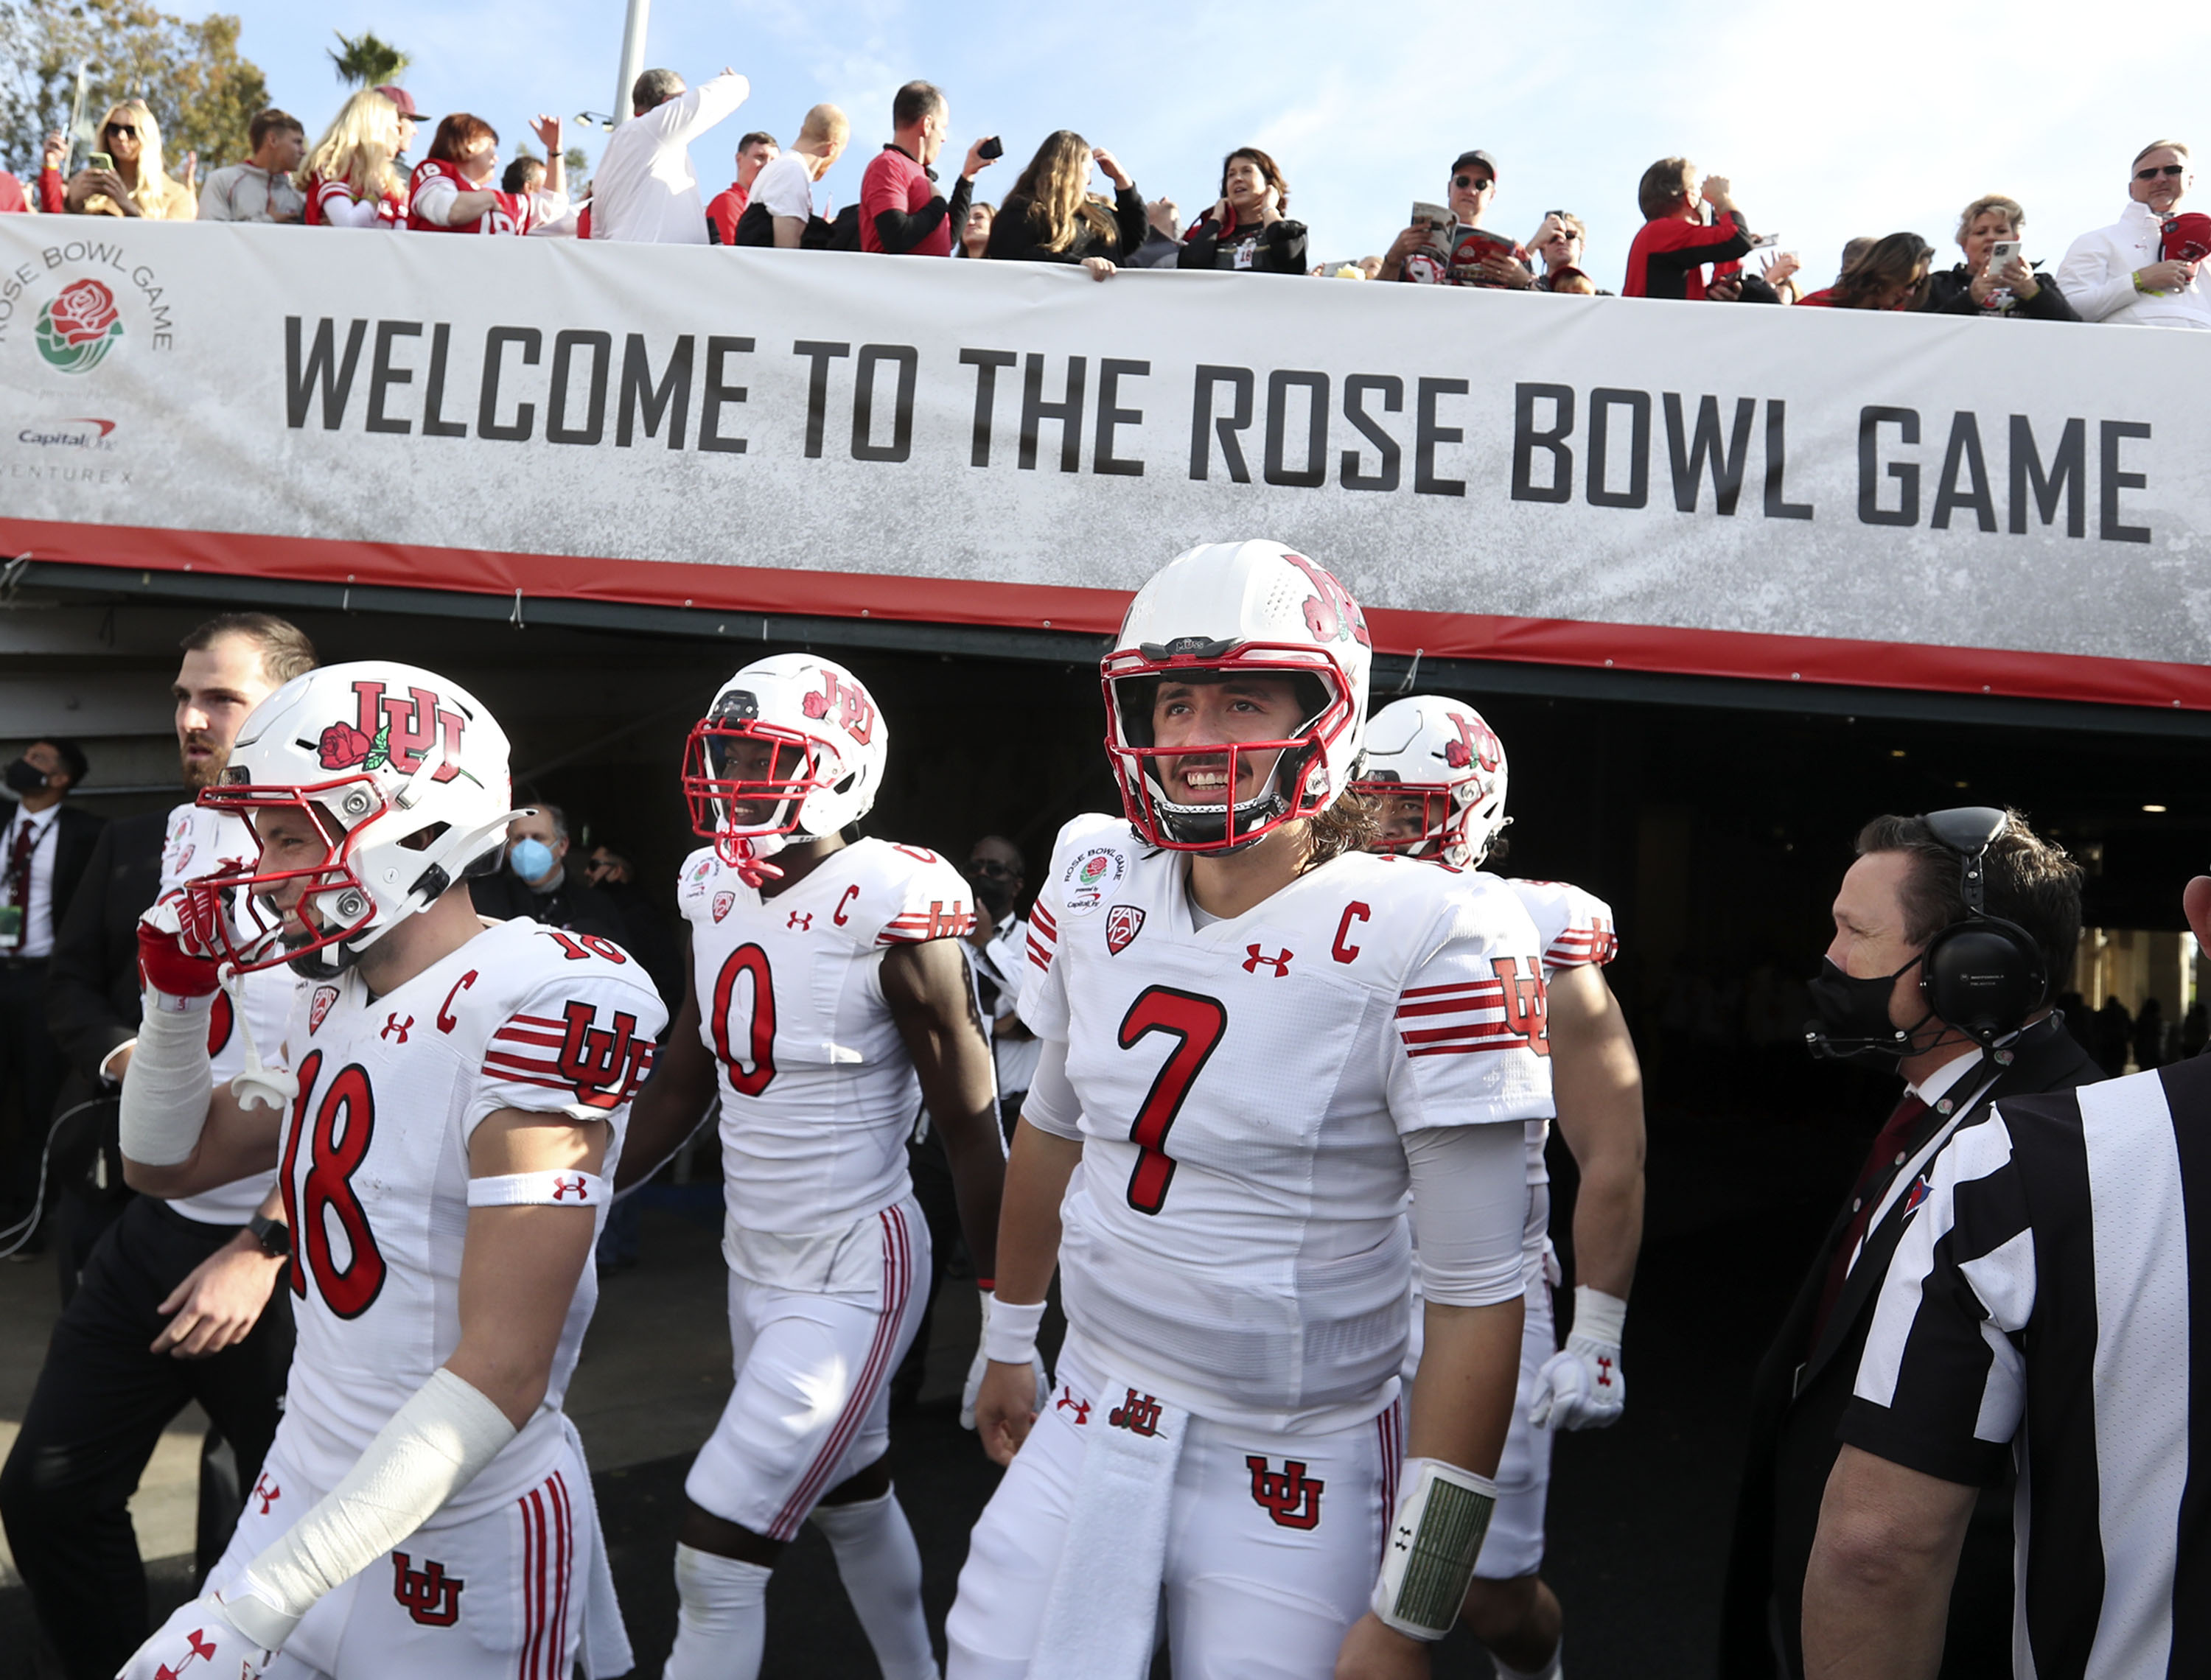 Members of the Utah football team walk onto the field for the game against Ohio State in the Rose Bowl in Pasadena, Calif.